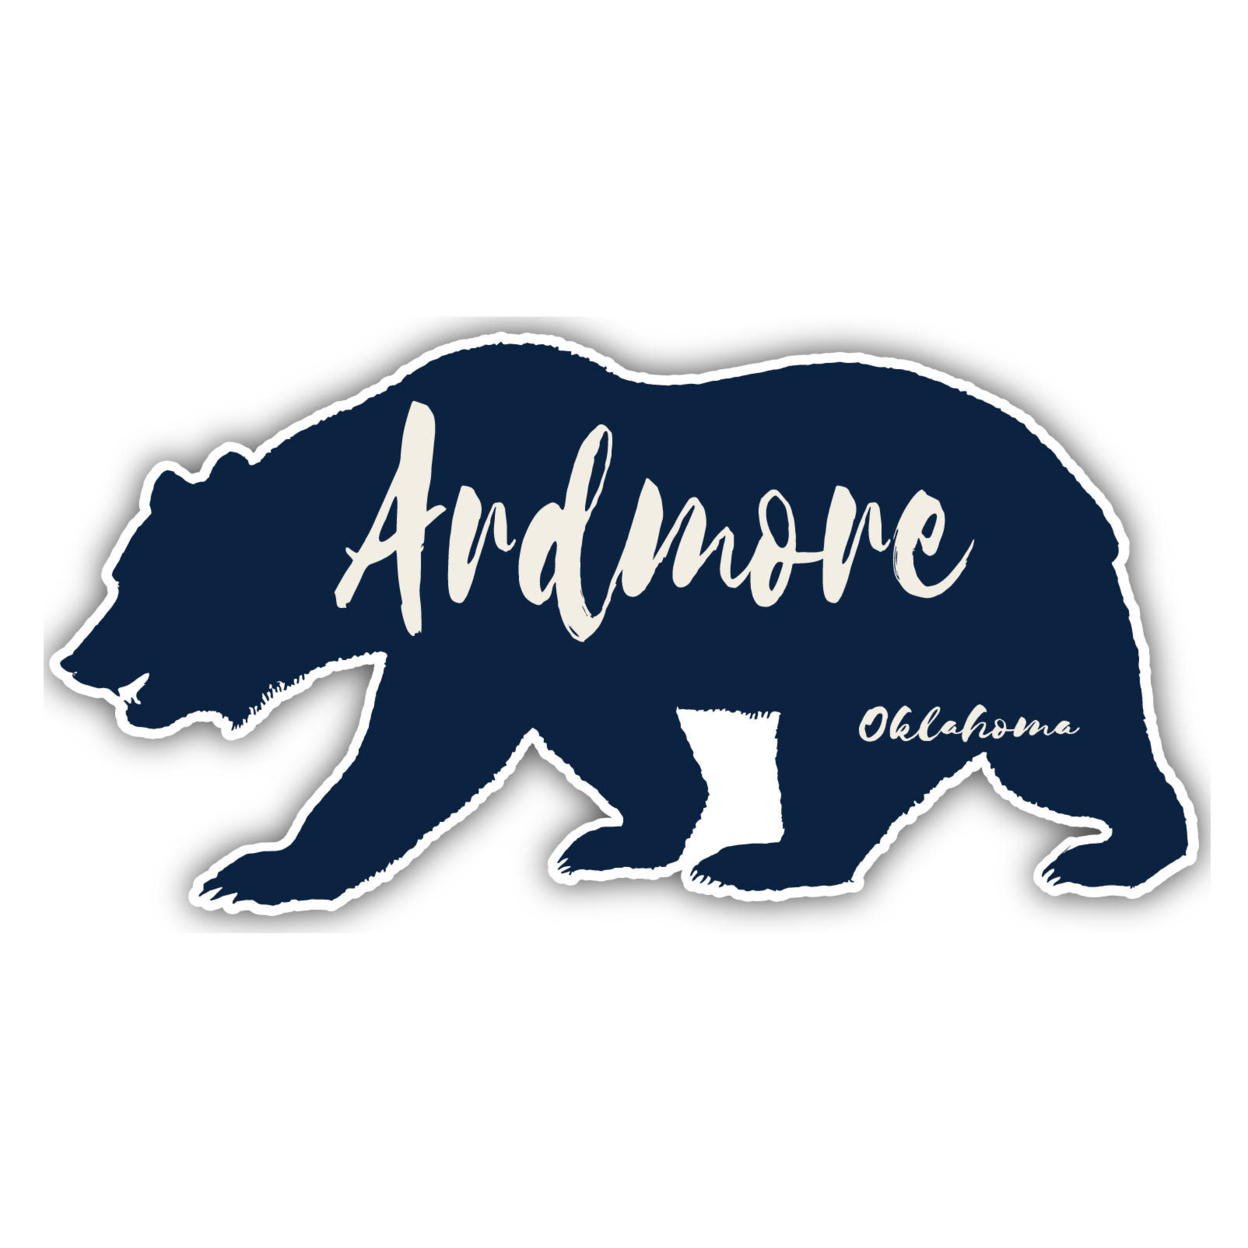 Ardmore Oklahoma Souvenir Decorative Stickers (Choose Theme And Size) - 4-Pack, 2-Inch, Bear